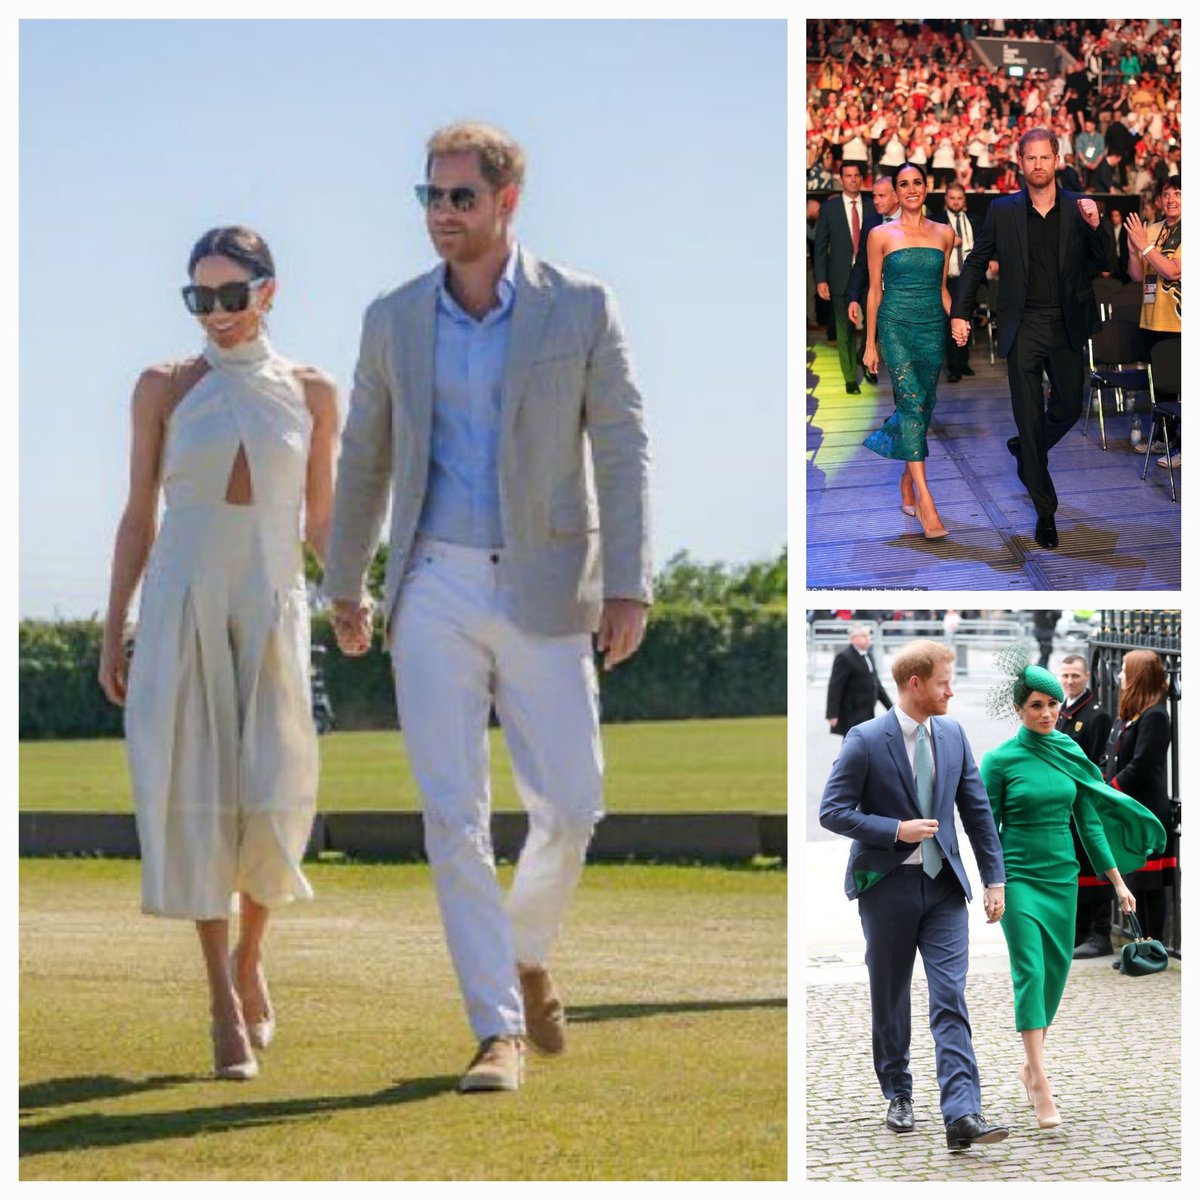 Harry and Meghan, The Sussexes, are shining bright like 💎s, and there's nothing any #ToxicBritishPress, RR, or anyone from #ThatFamily can do to dim their light🌟.
#HarryandMeghan
#InvictusGames 
#AmericanRivieraOrchard
#ARO 
#Sentebale
#Archewell
#ServiceIsUniversal
#Nigeria